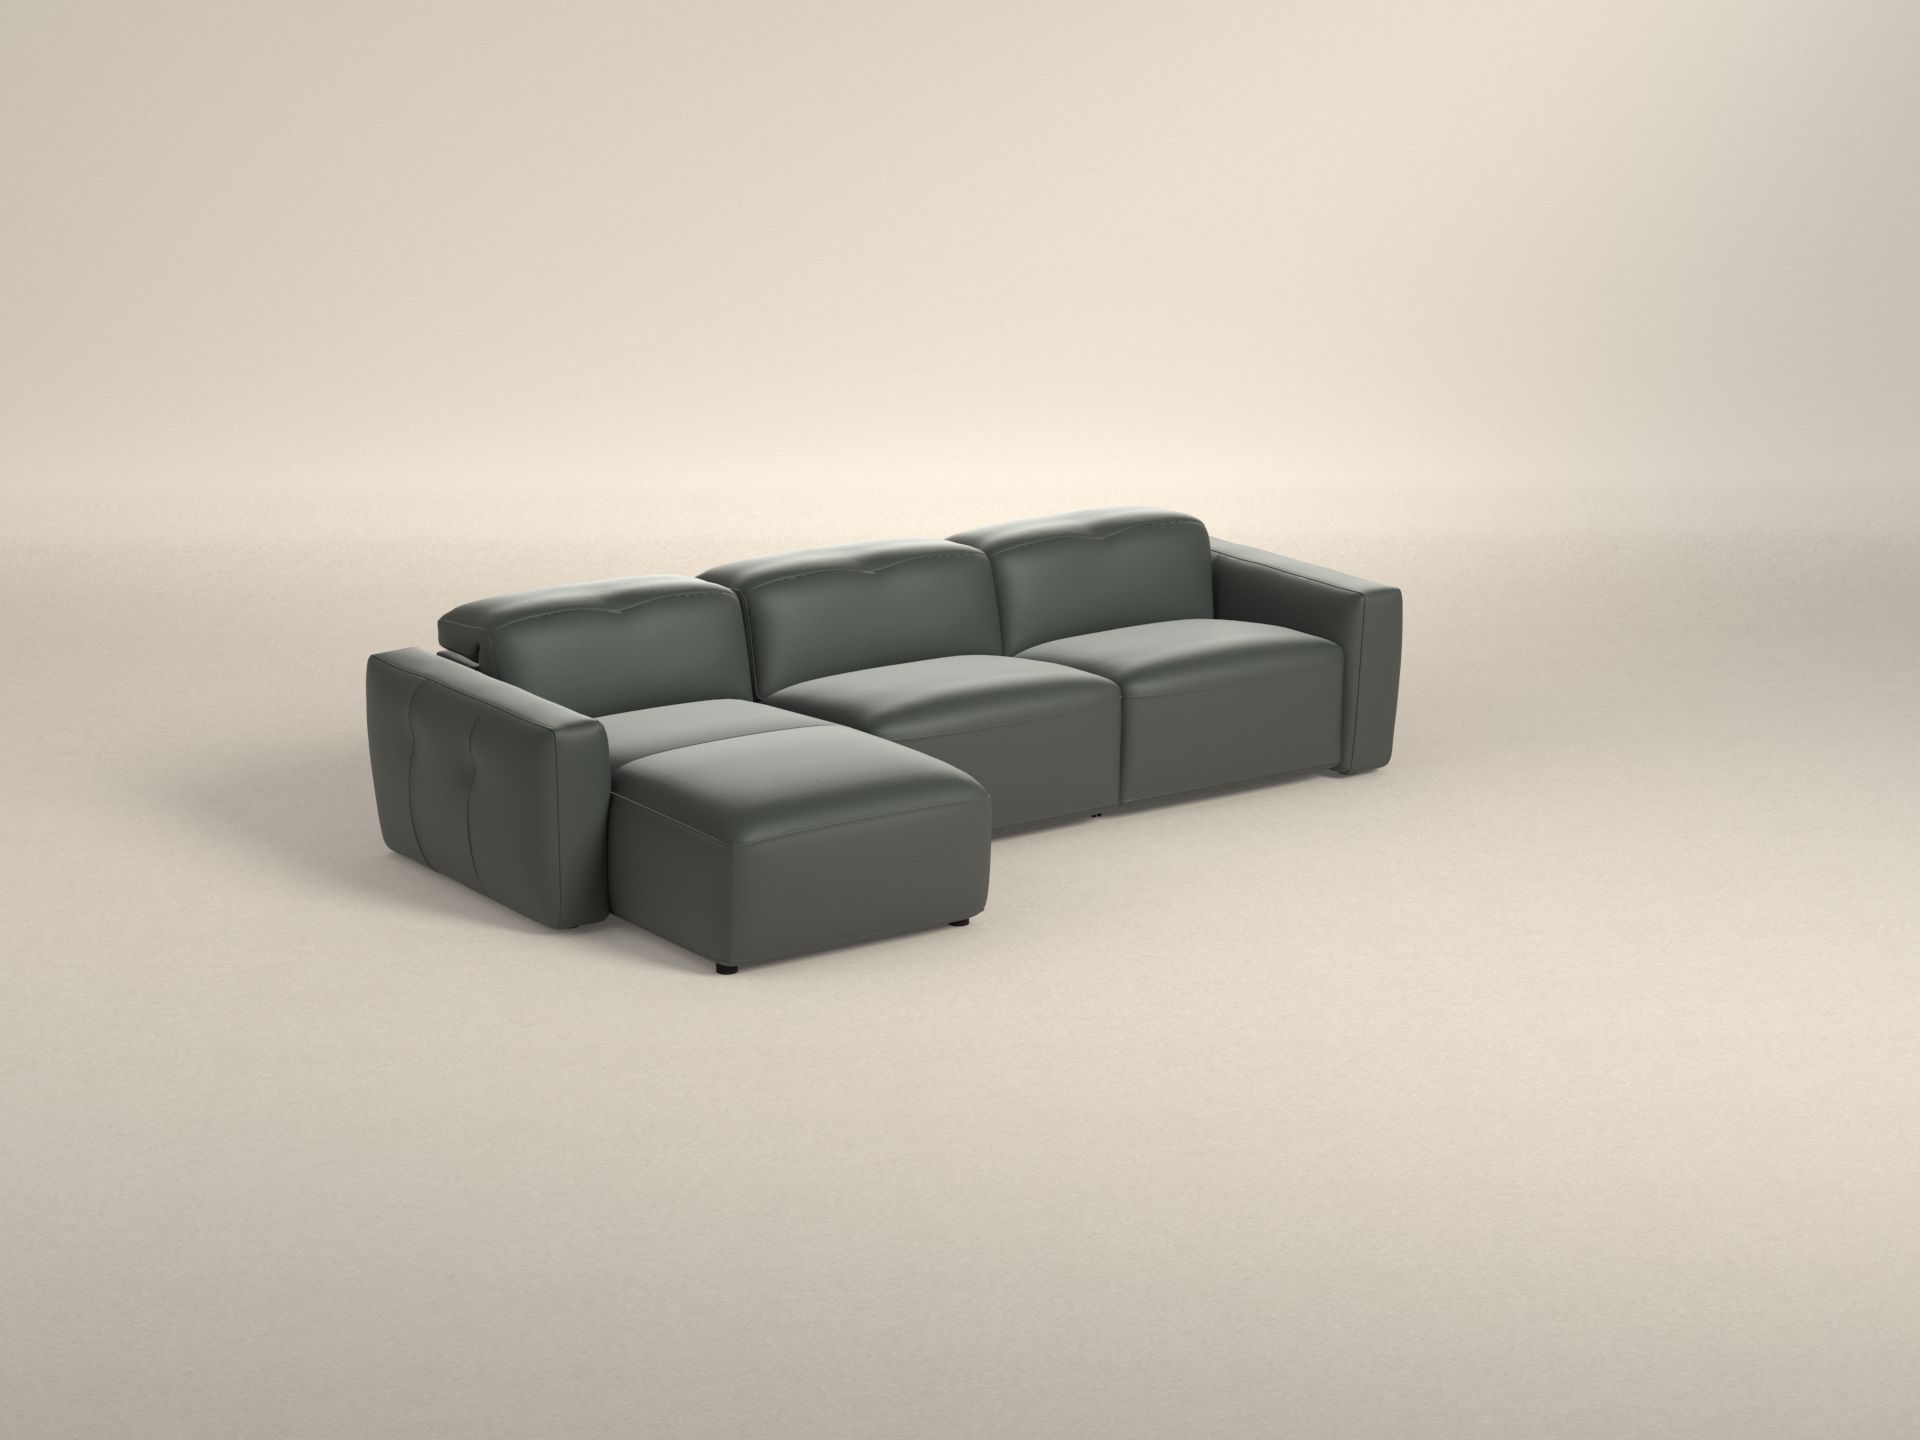 Preset default image - Colosseo Sofa with Chaise on left side - Leather